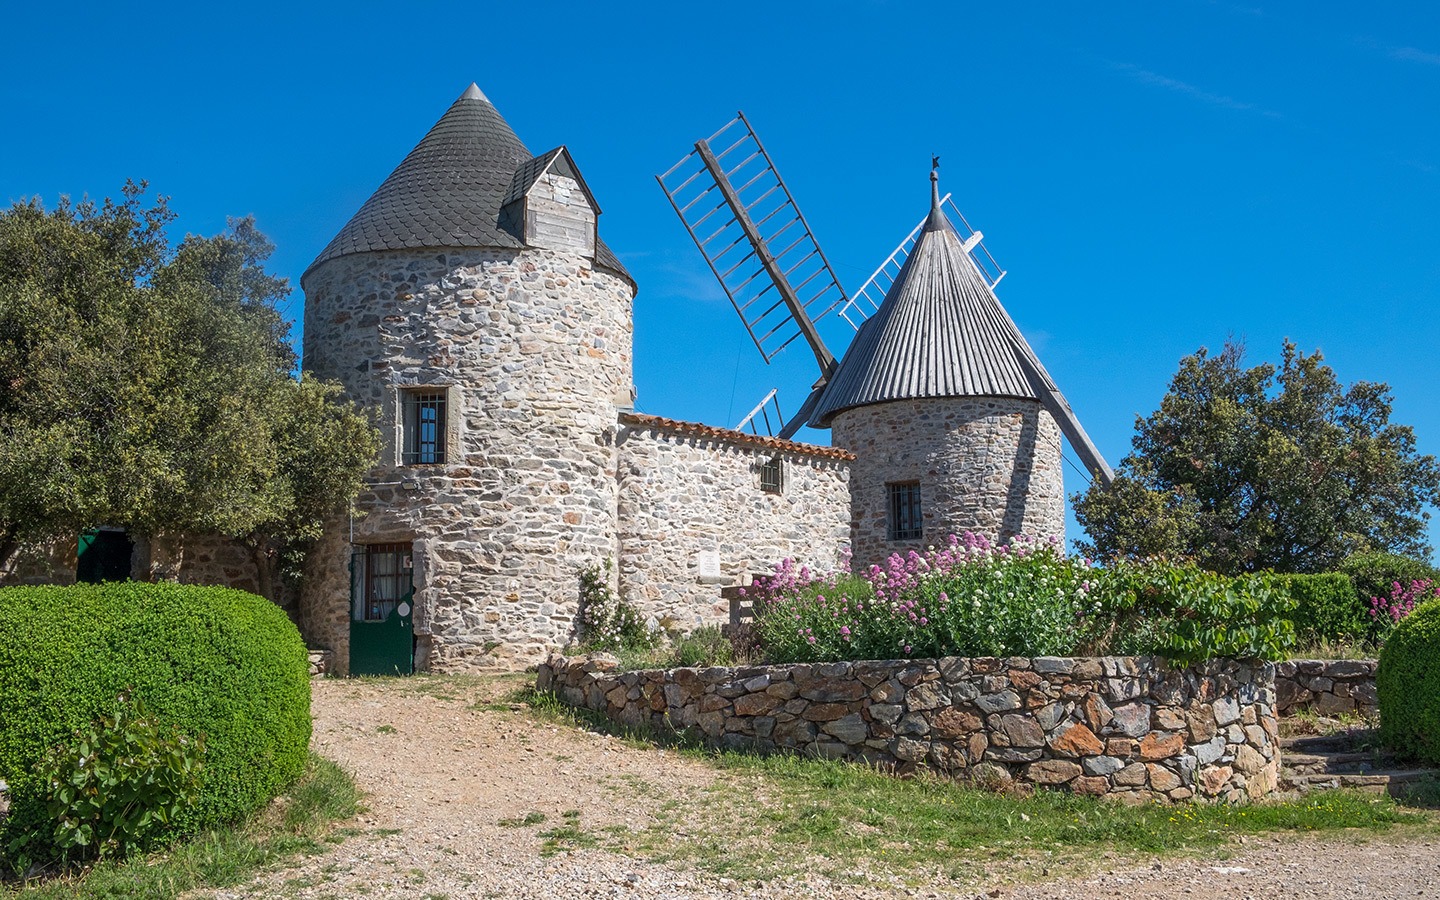 Faugères windmills, South of France